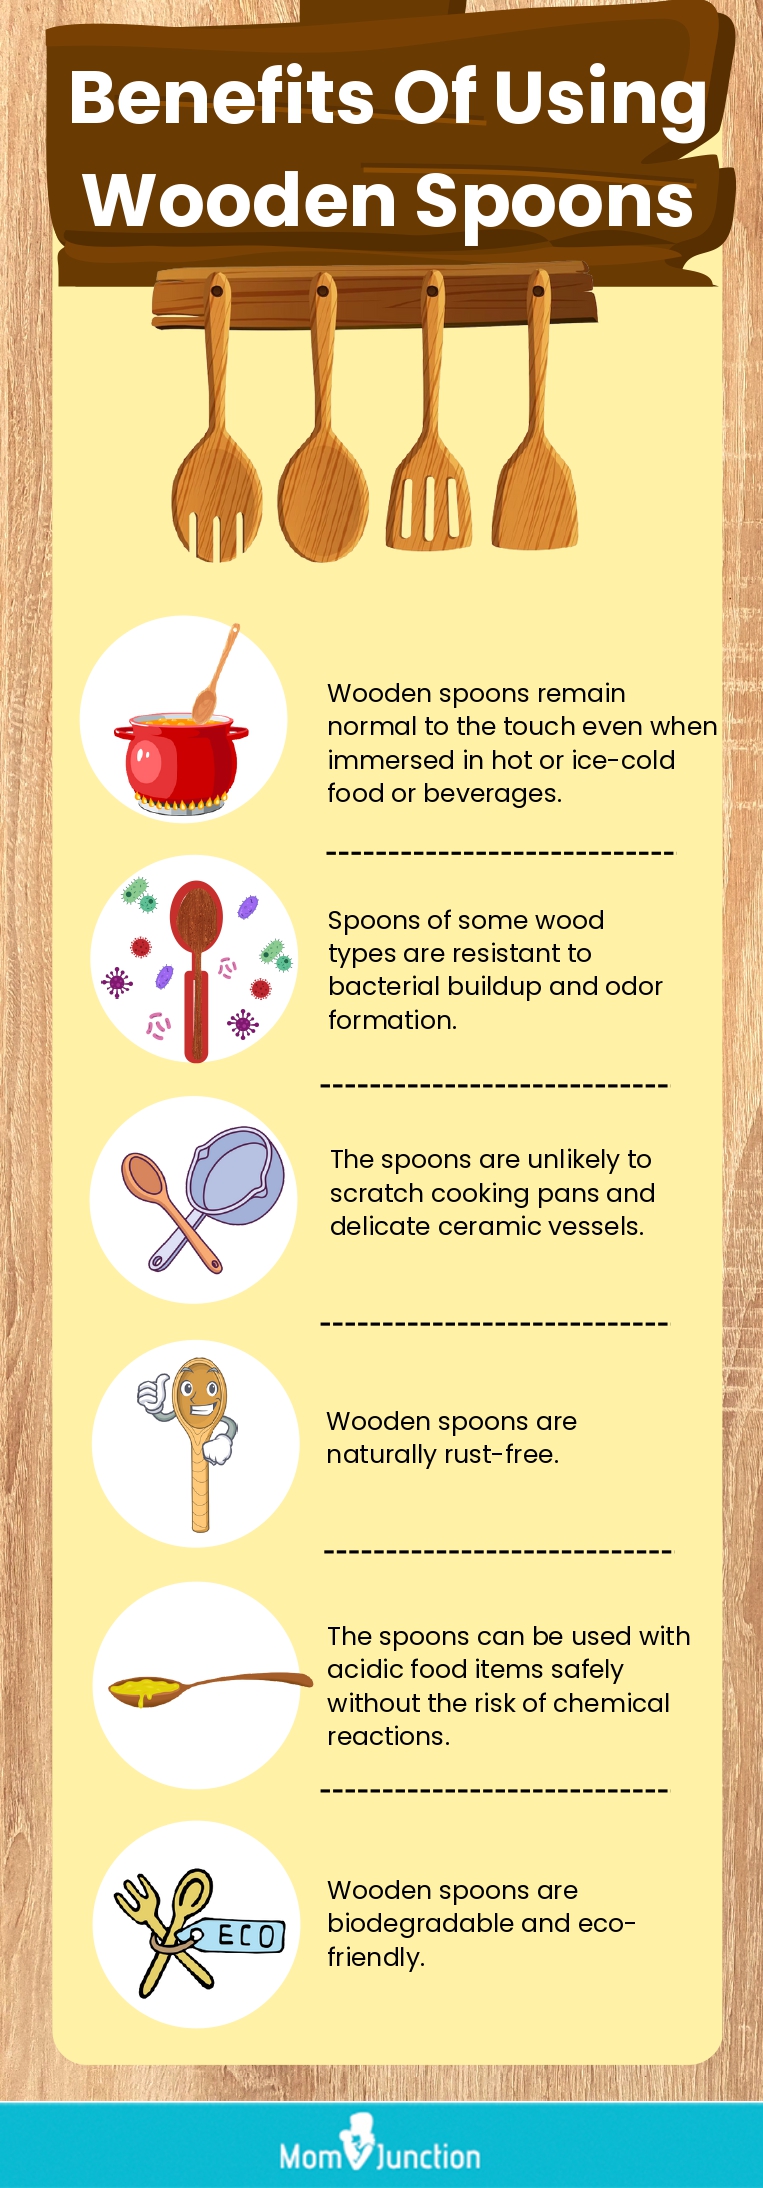 https://www.momjunction.com/wp-content/uploads/2020/06/Benefits-Of-Using-Wooden-Spoons-4_page-0001.jpg